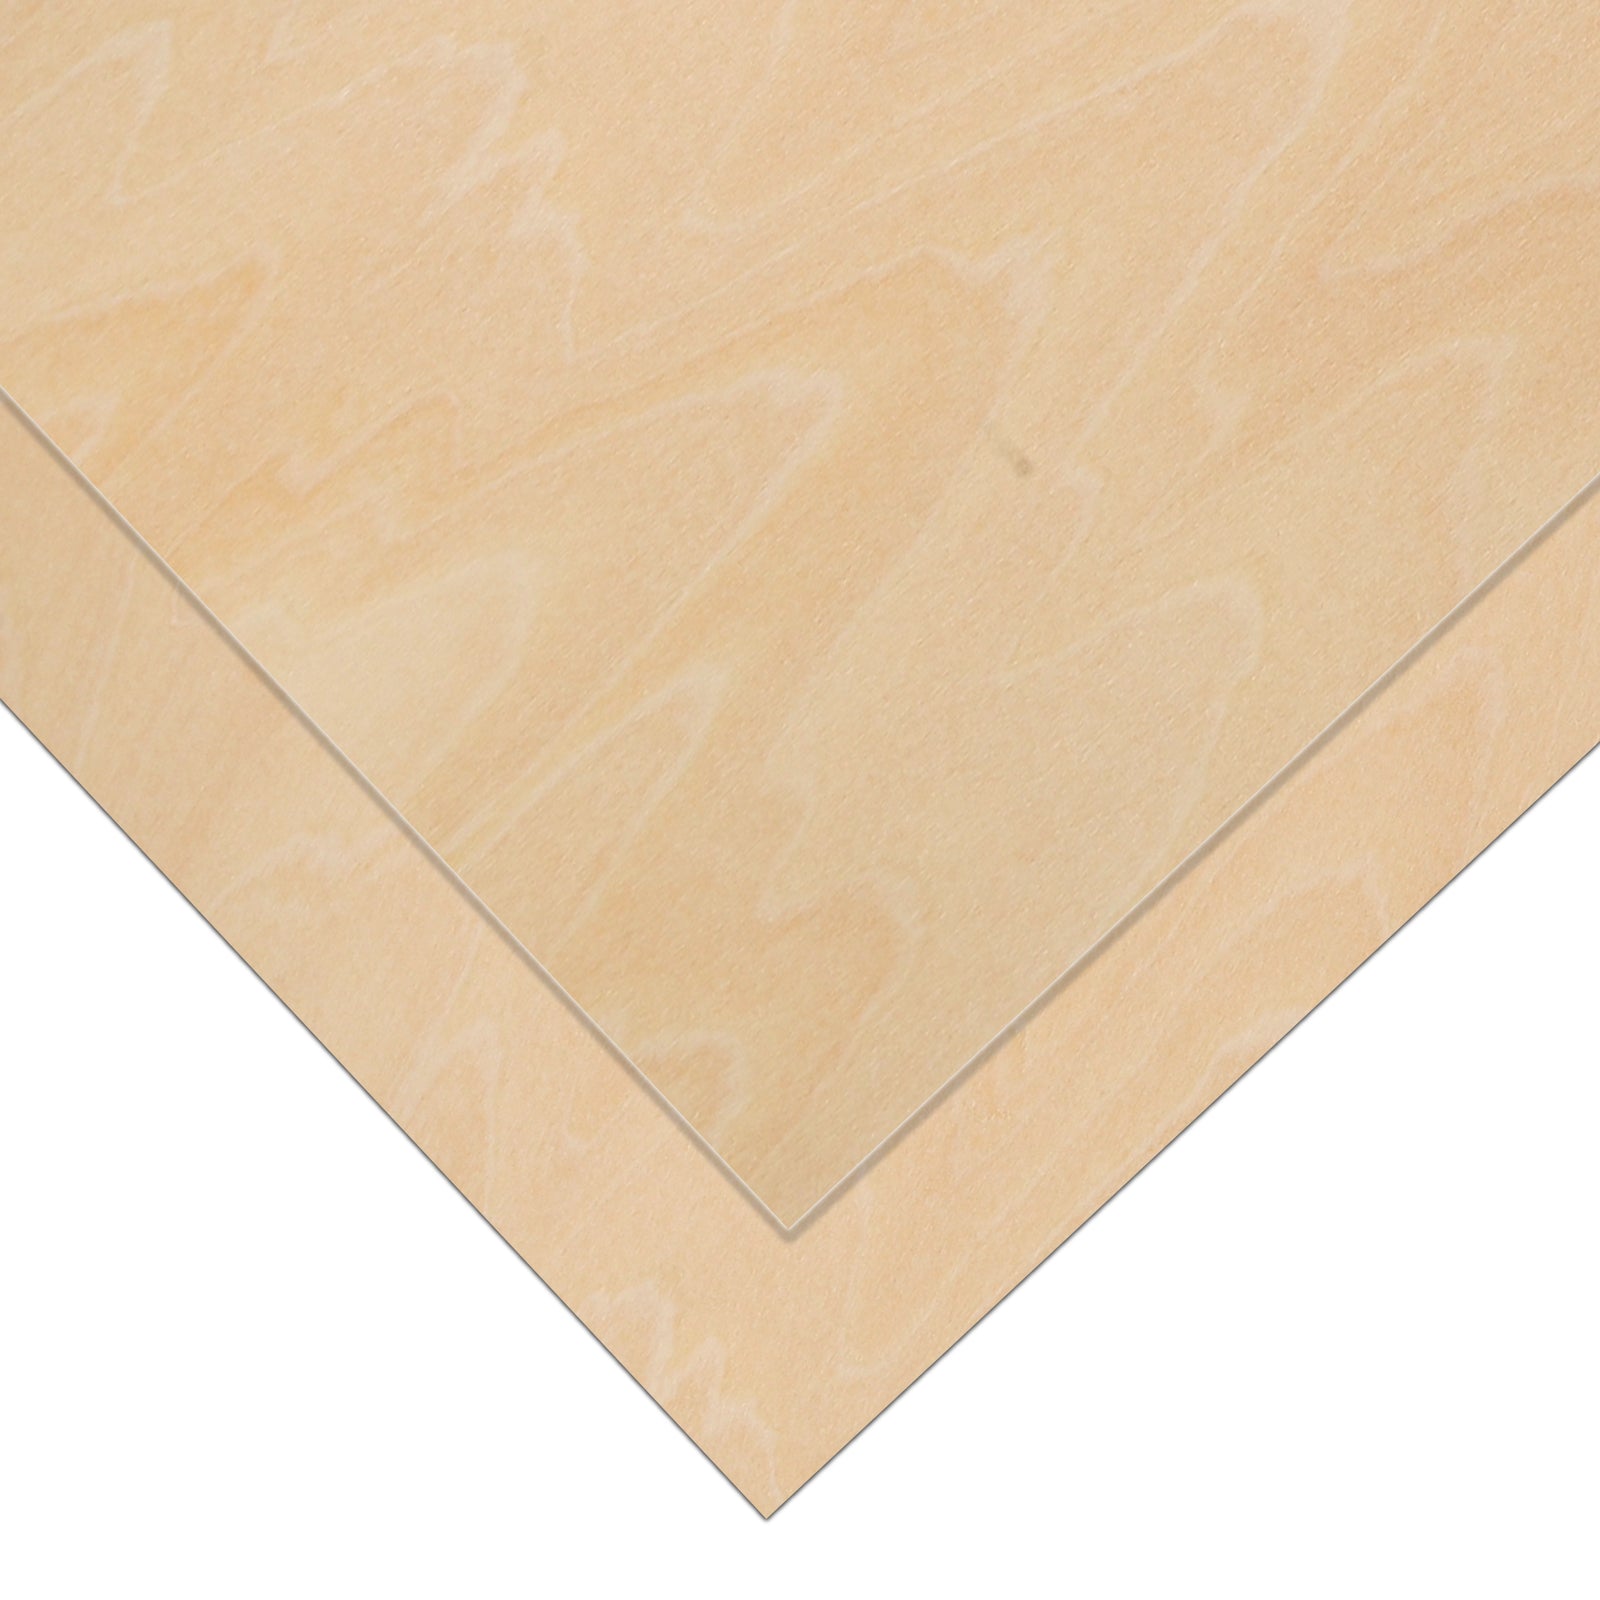 A4 Plywood Sheets 3mm Thickness (+/- 0.2mm) Basswood Plywood 11.8x11.8 inch for Engraving